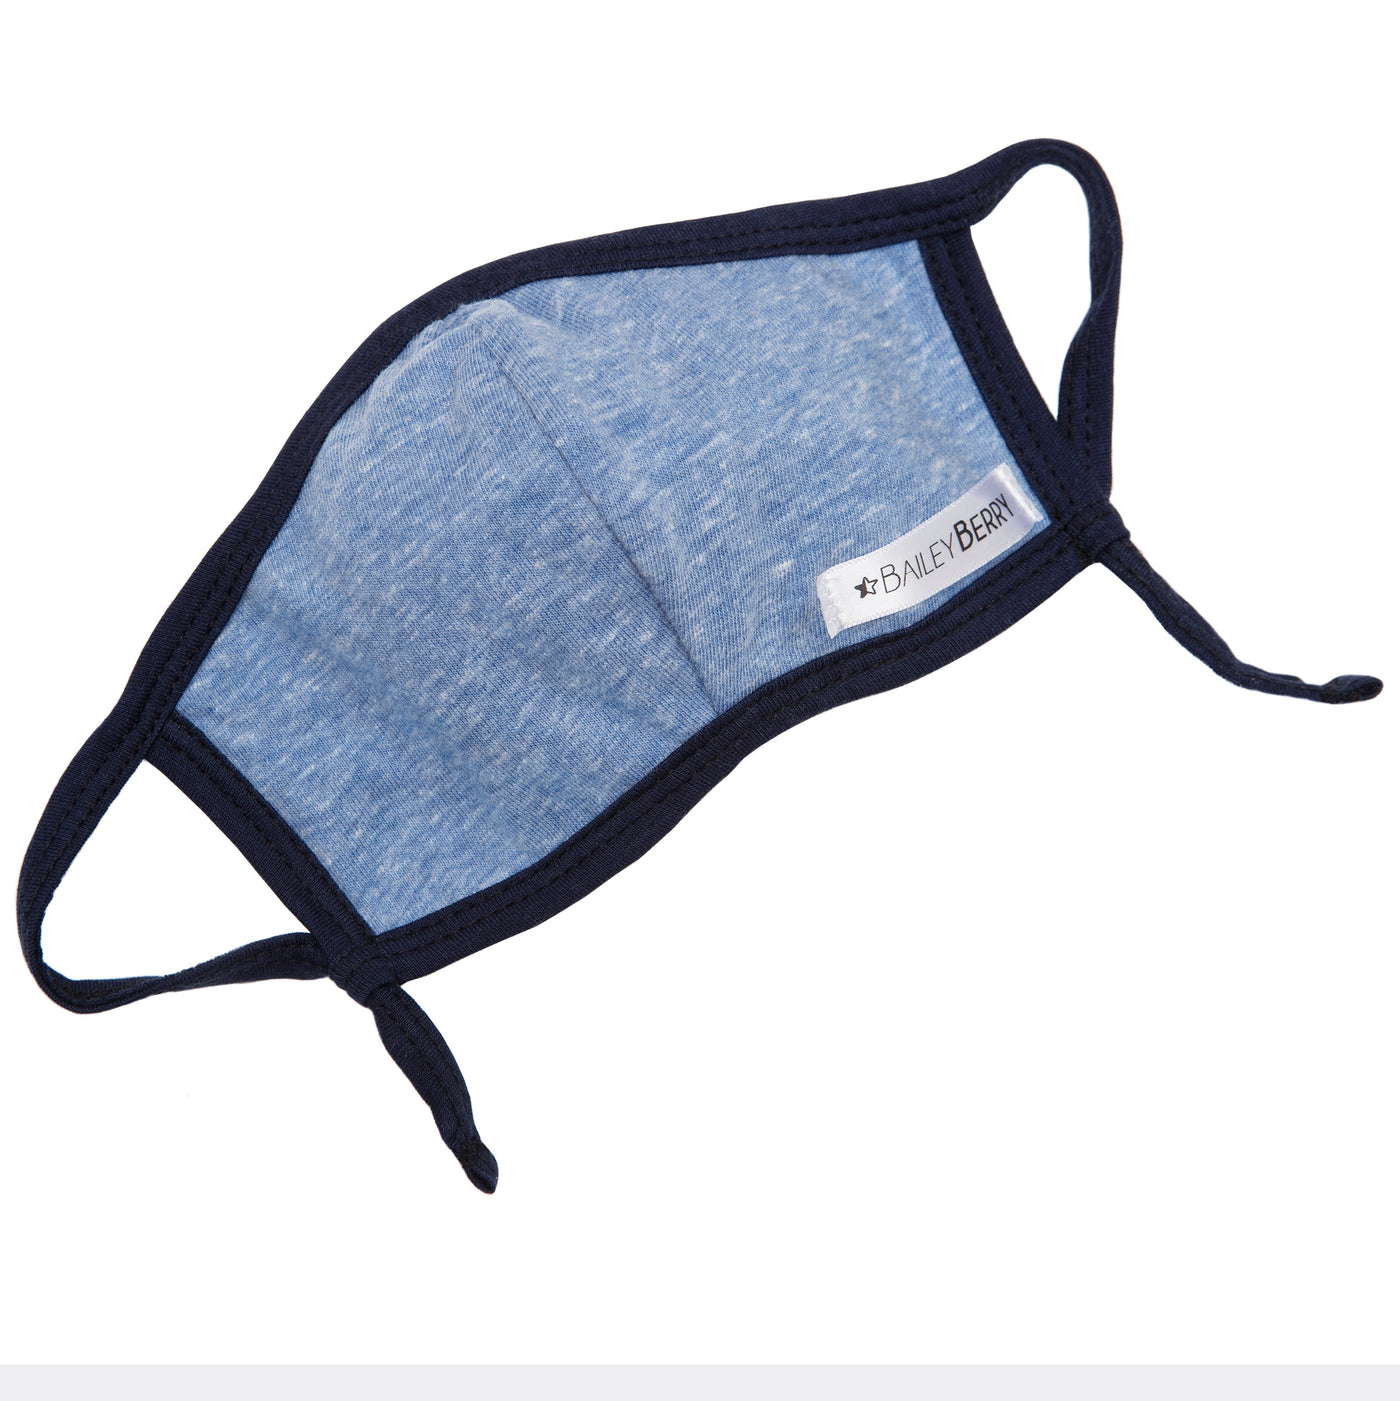 BAILEY BERRY Cherry, Denim & Plum Face Mask 3-Pack for Adults with Adjustable Straps